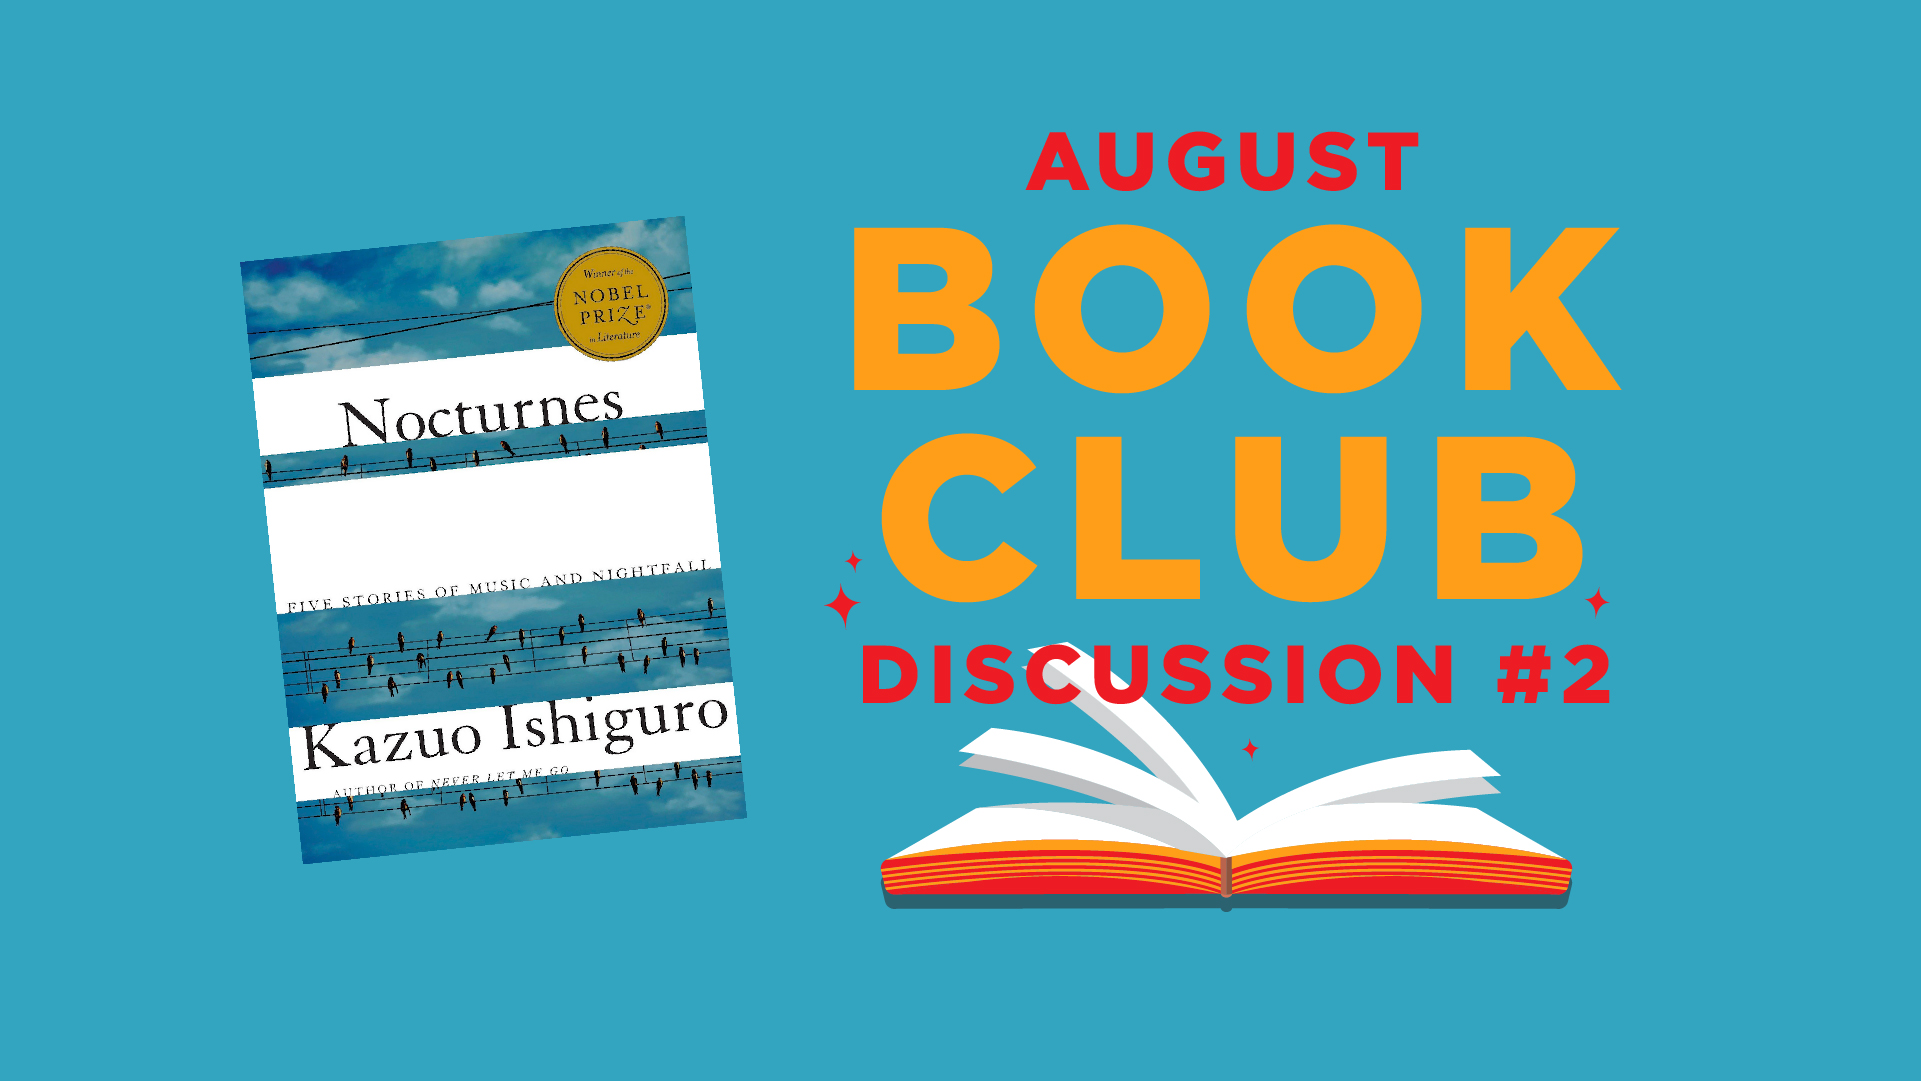 August Book Club Discussion #2 - Nocturnes by Kazuo Ishiguro